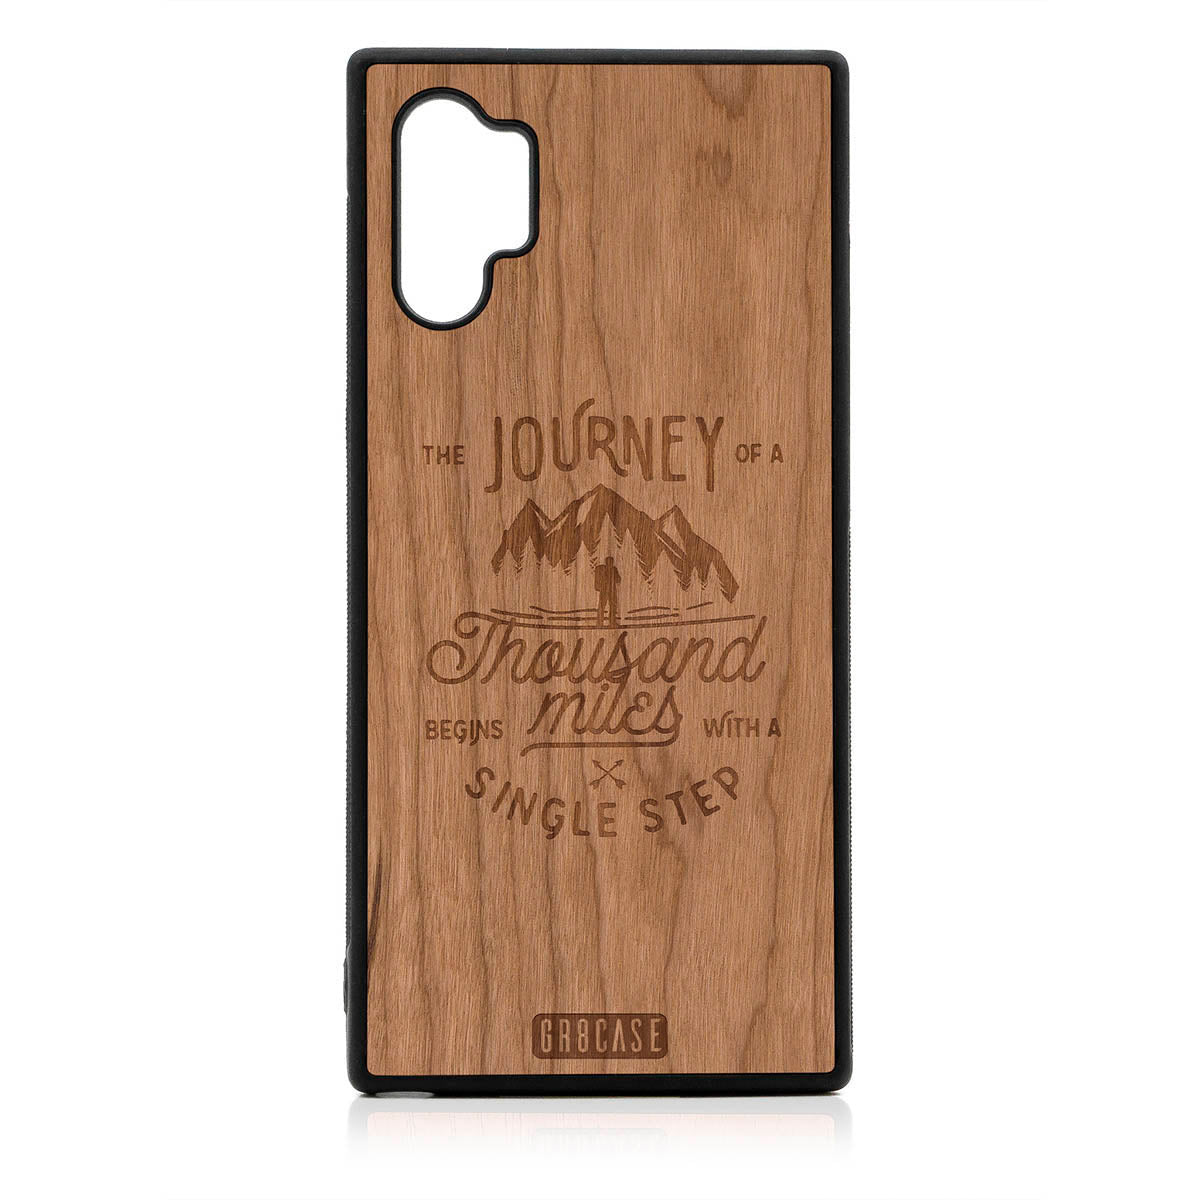 The Journey Of A Thousand Miles Begins With A Single Step Design Wood Case For Samsung Galaxy Note 10 Plus